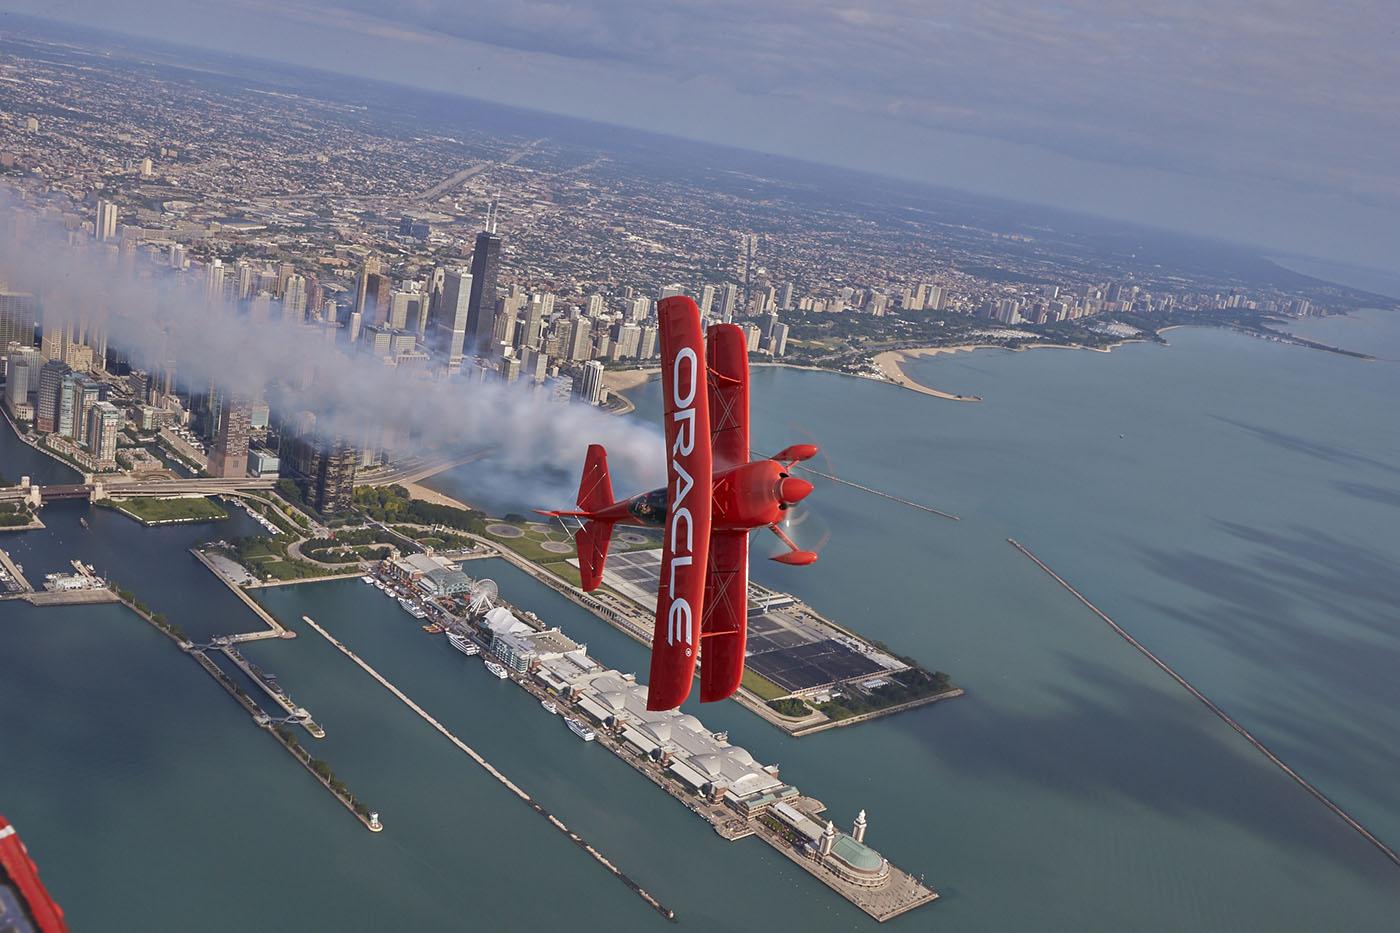 The Chicago Air and Water Show. Photo: City of Chicago, DCASE